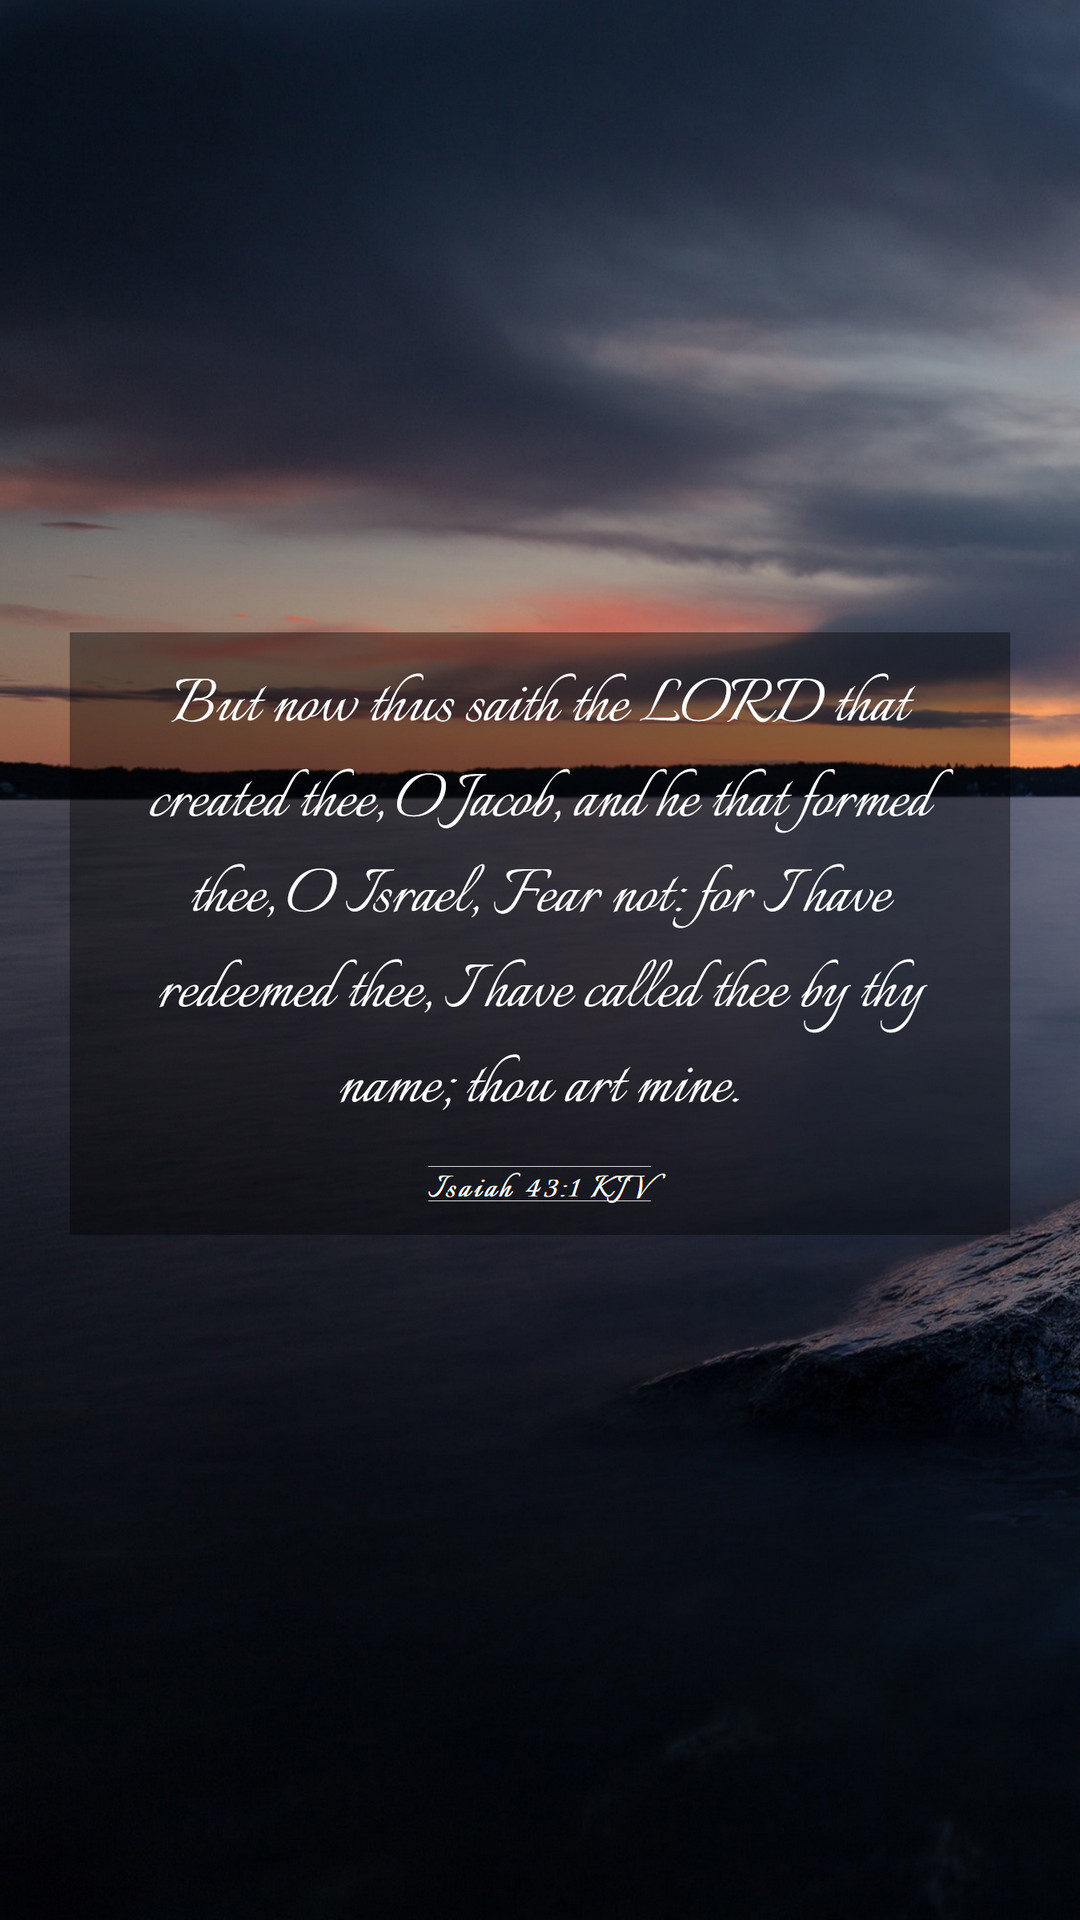 Isaiah 43:1 KJV Mobile Phone Wallpaper now thus saith the LORD that created thee, O